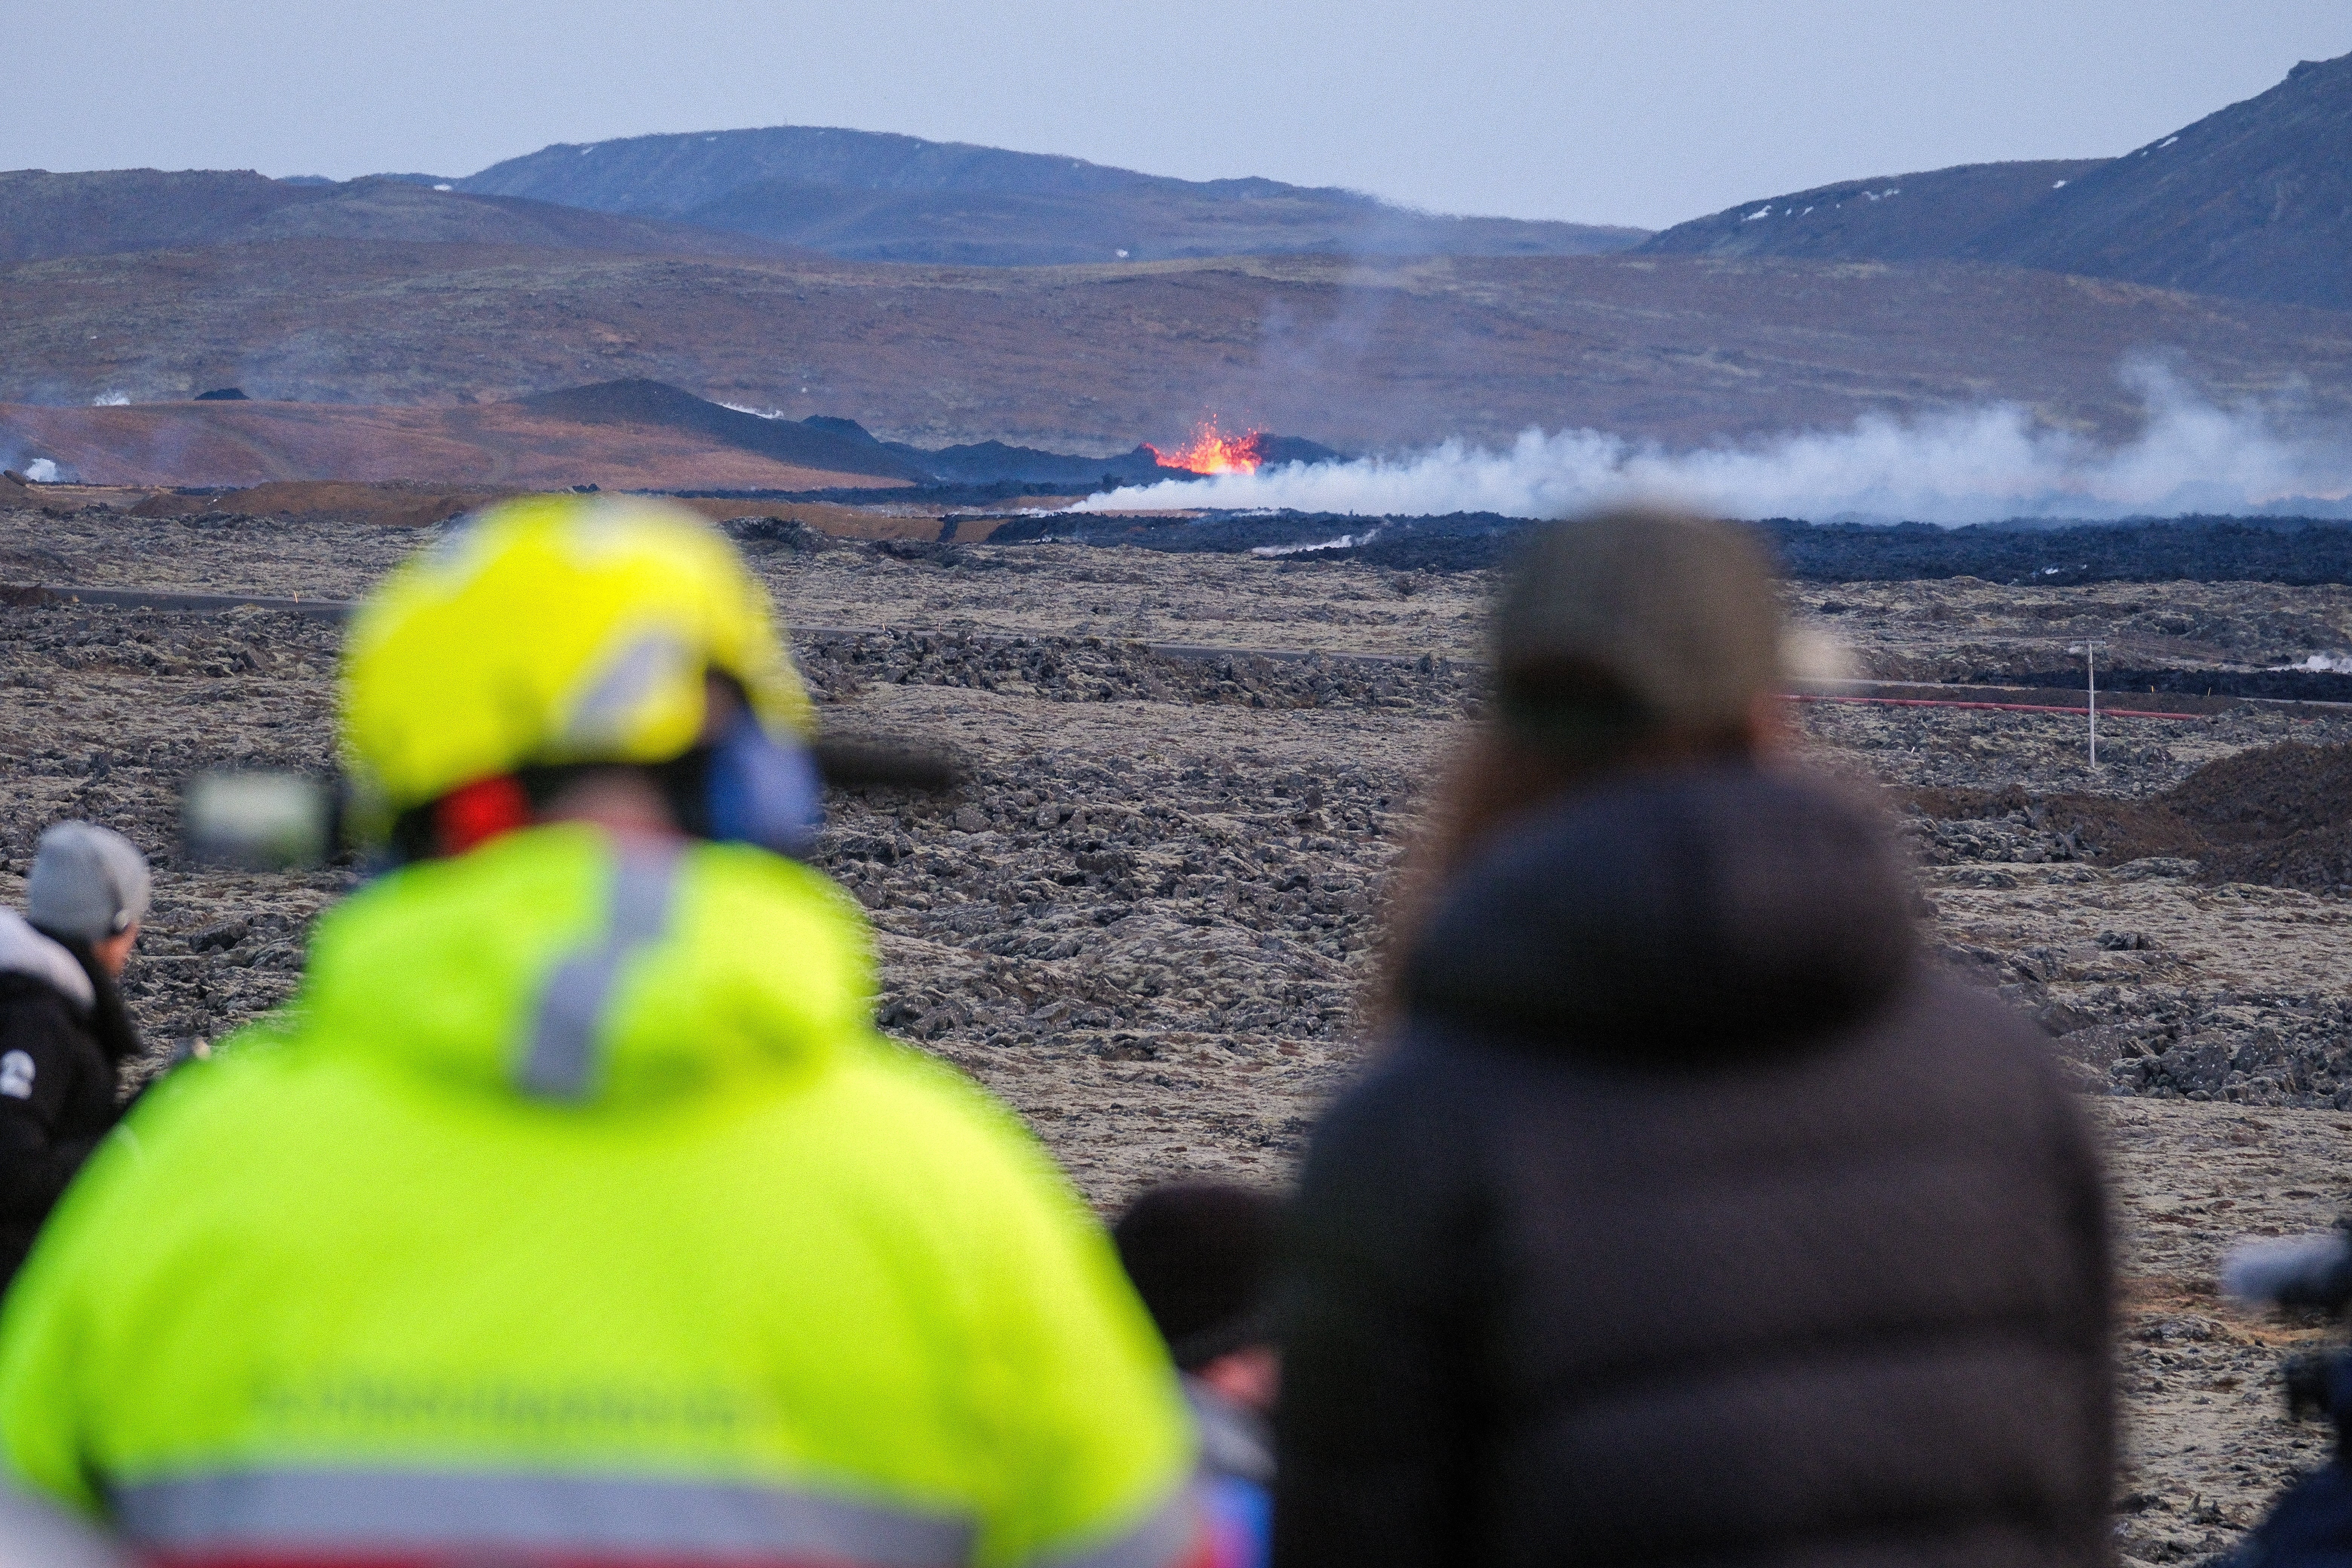 Lava explosions and rising smoke from a crack in the ground close to the town of Grindavik